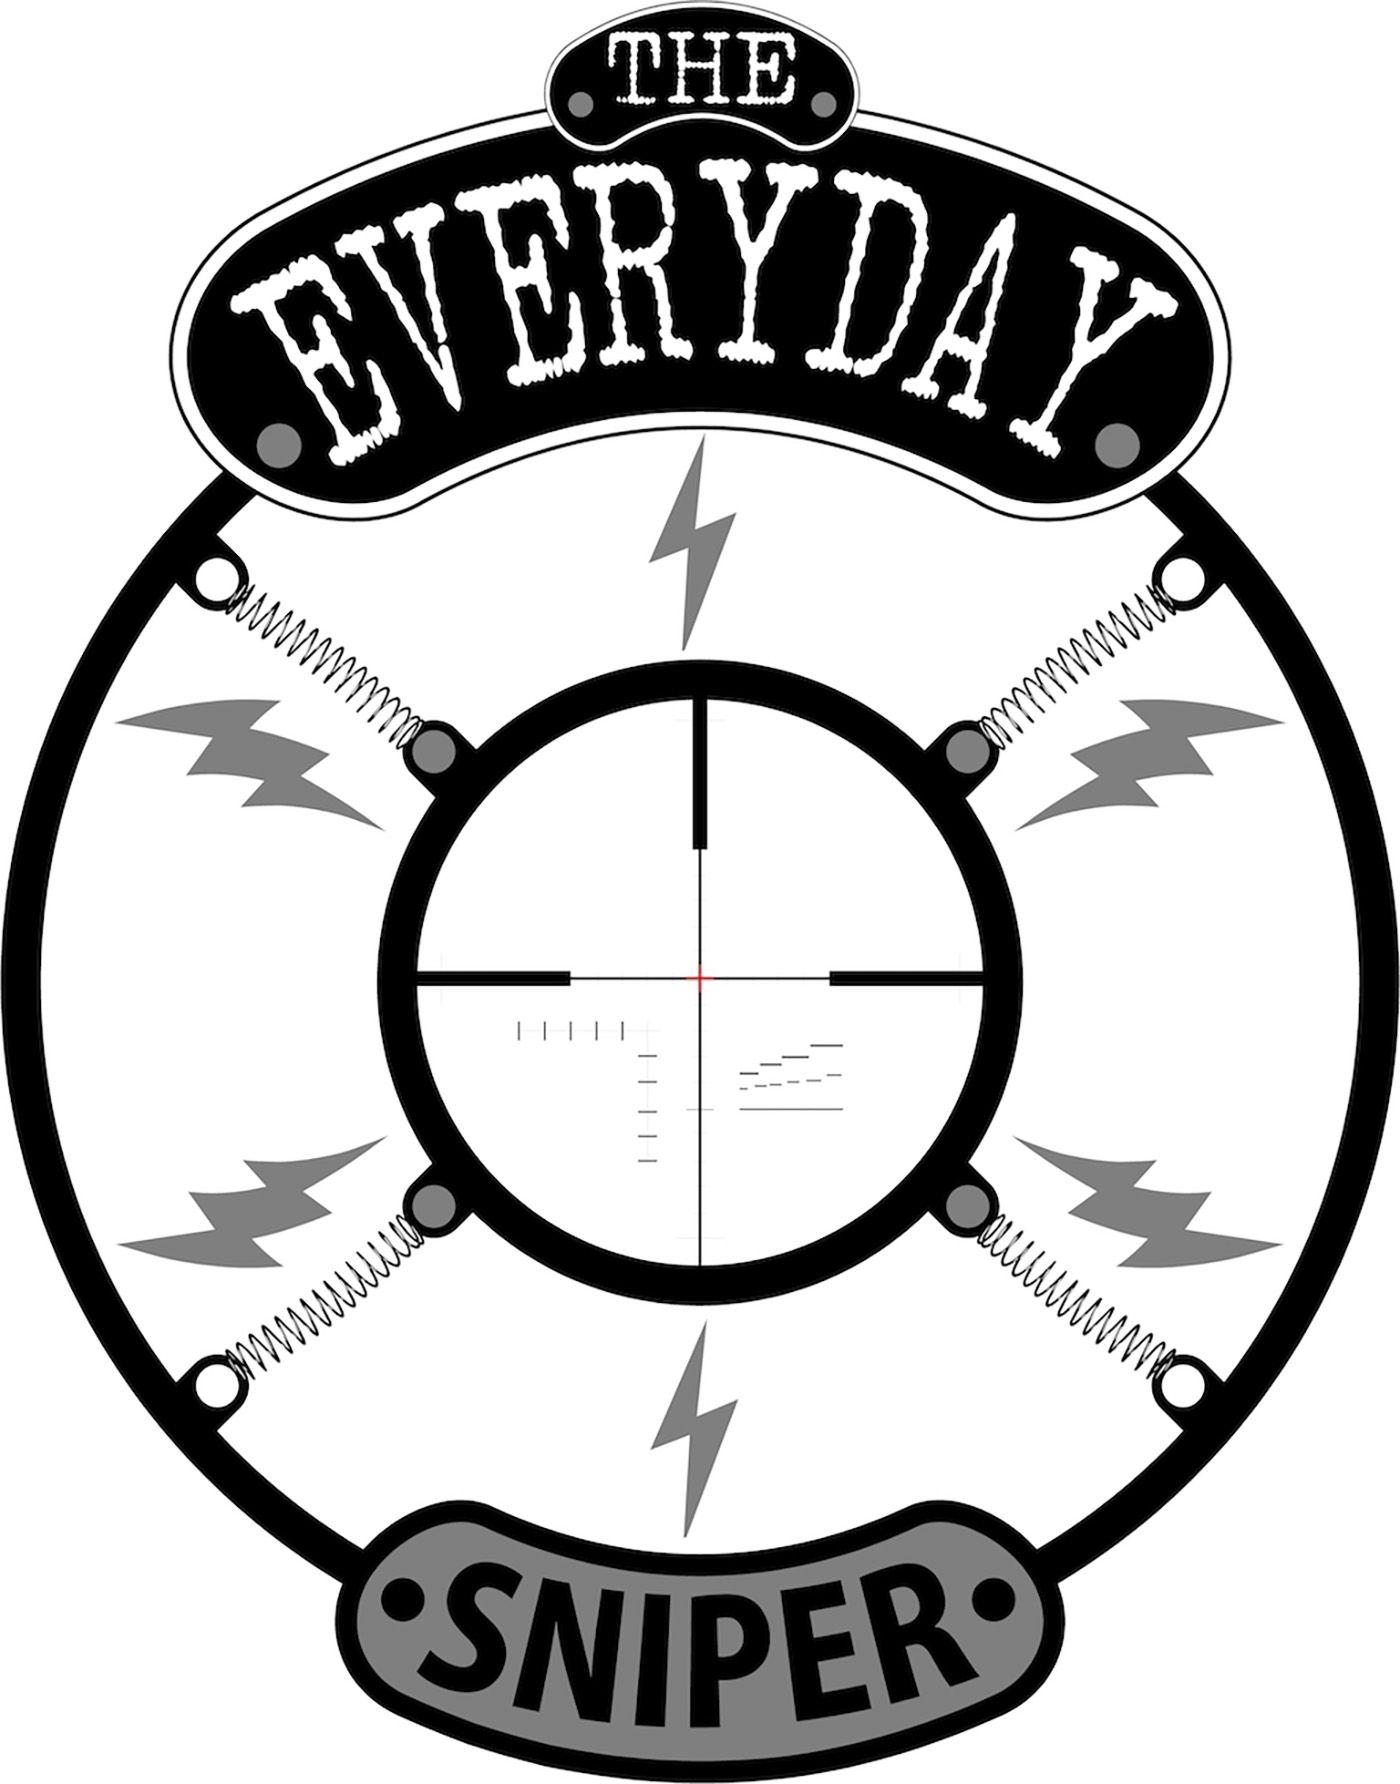 High Sniping Logo - The Everyday Sniper Podcast